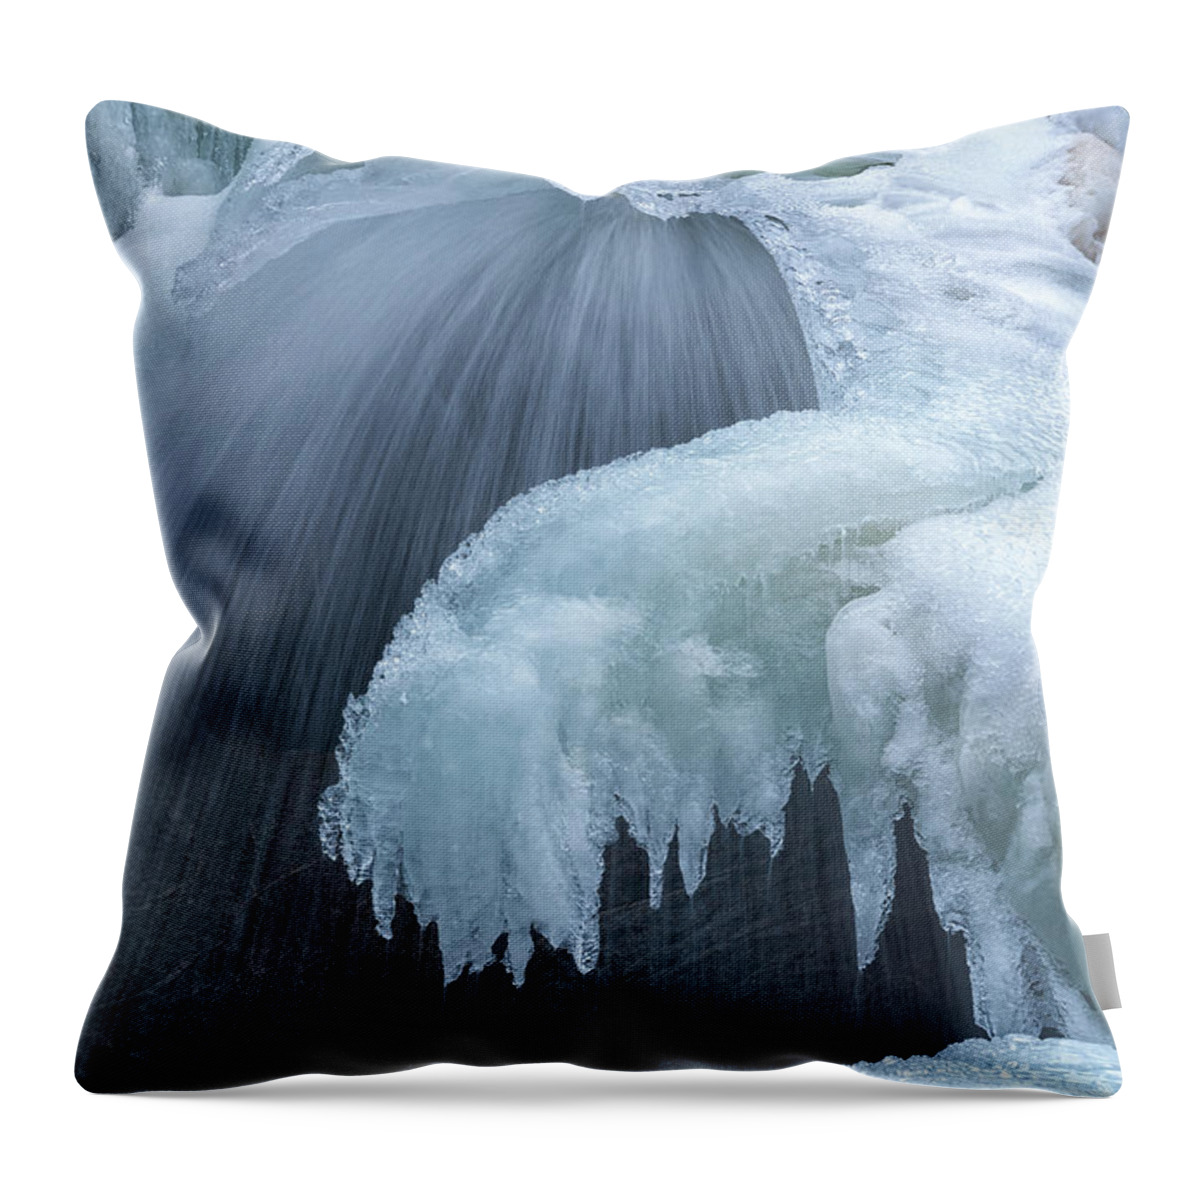 Ice Throw Pillow featuring the photograph Iced by Darren White